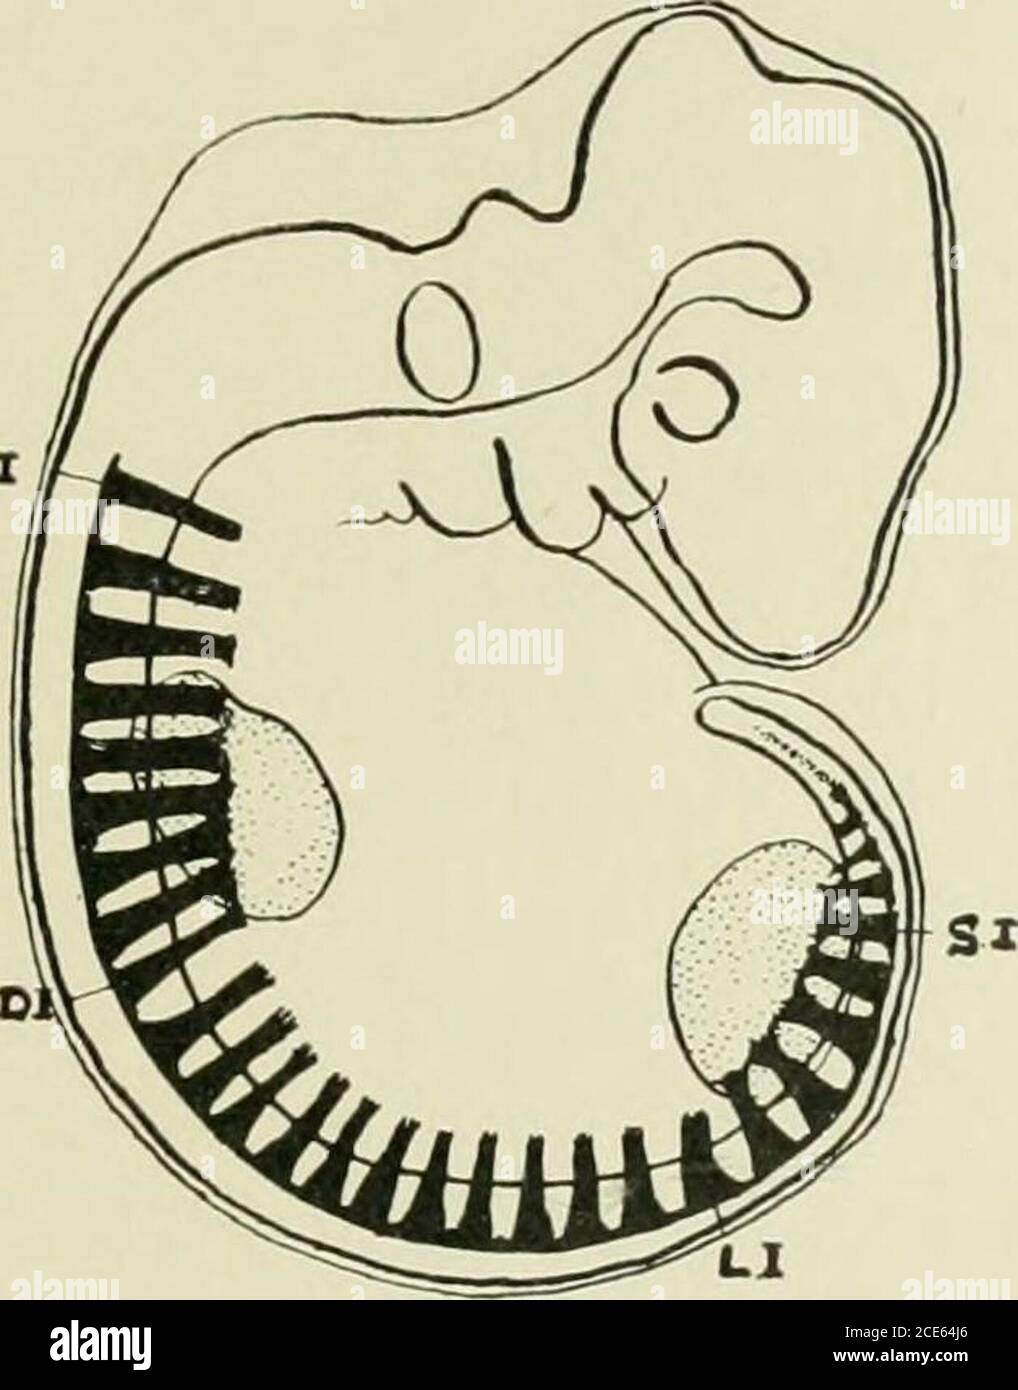 . Journal of anatomy . ss snakes the vertebral bodies carry ribs from end to endof the vertebral column, and this completeness of the rib series is doubtless Relation of Limb Plexuses to Ribs and Vertebral Column 389 due to the fact that the nerves, instead of being gathered into plexuses forthe supply of limbs, run as bands round the body in the intervals betweenthe ribs. This complete rib series disappears with the introduction oflimbs; and it is suggested that, though other and functional factors doubt-less come into play at the same time, the gathering of the nerves into limbplexuses is th Stock Photo